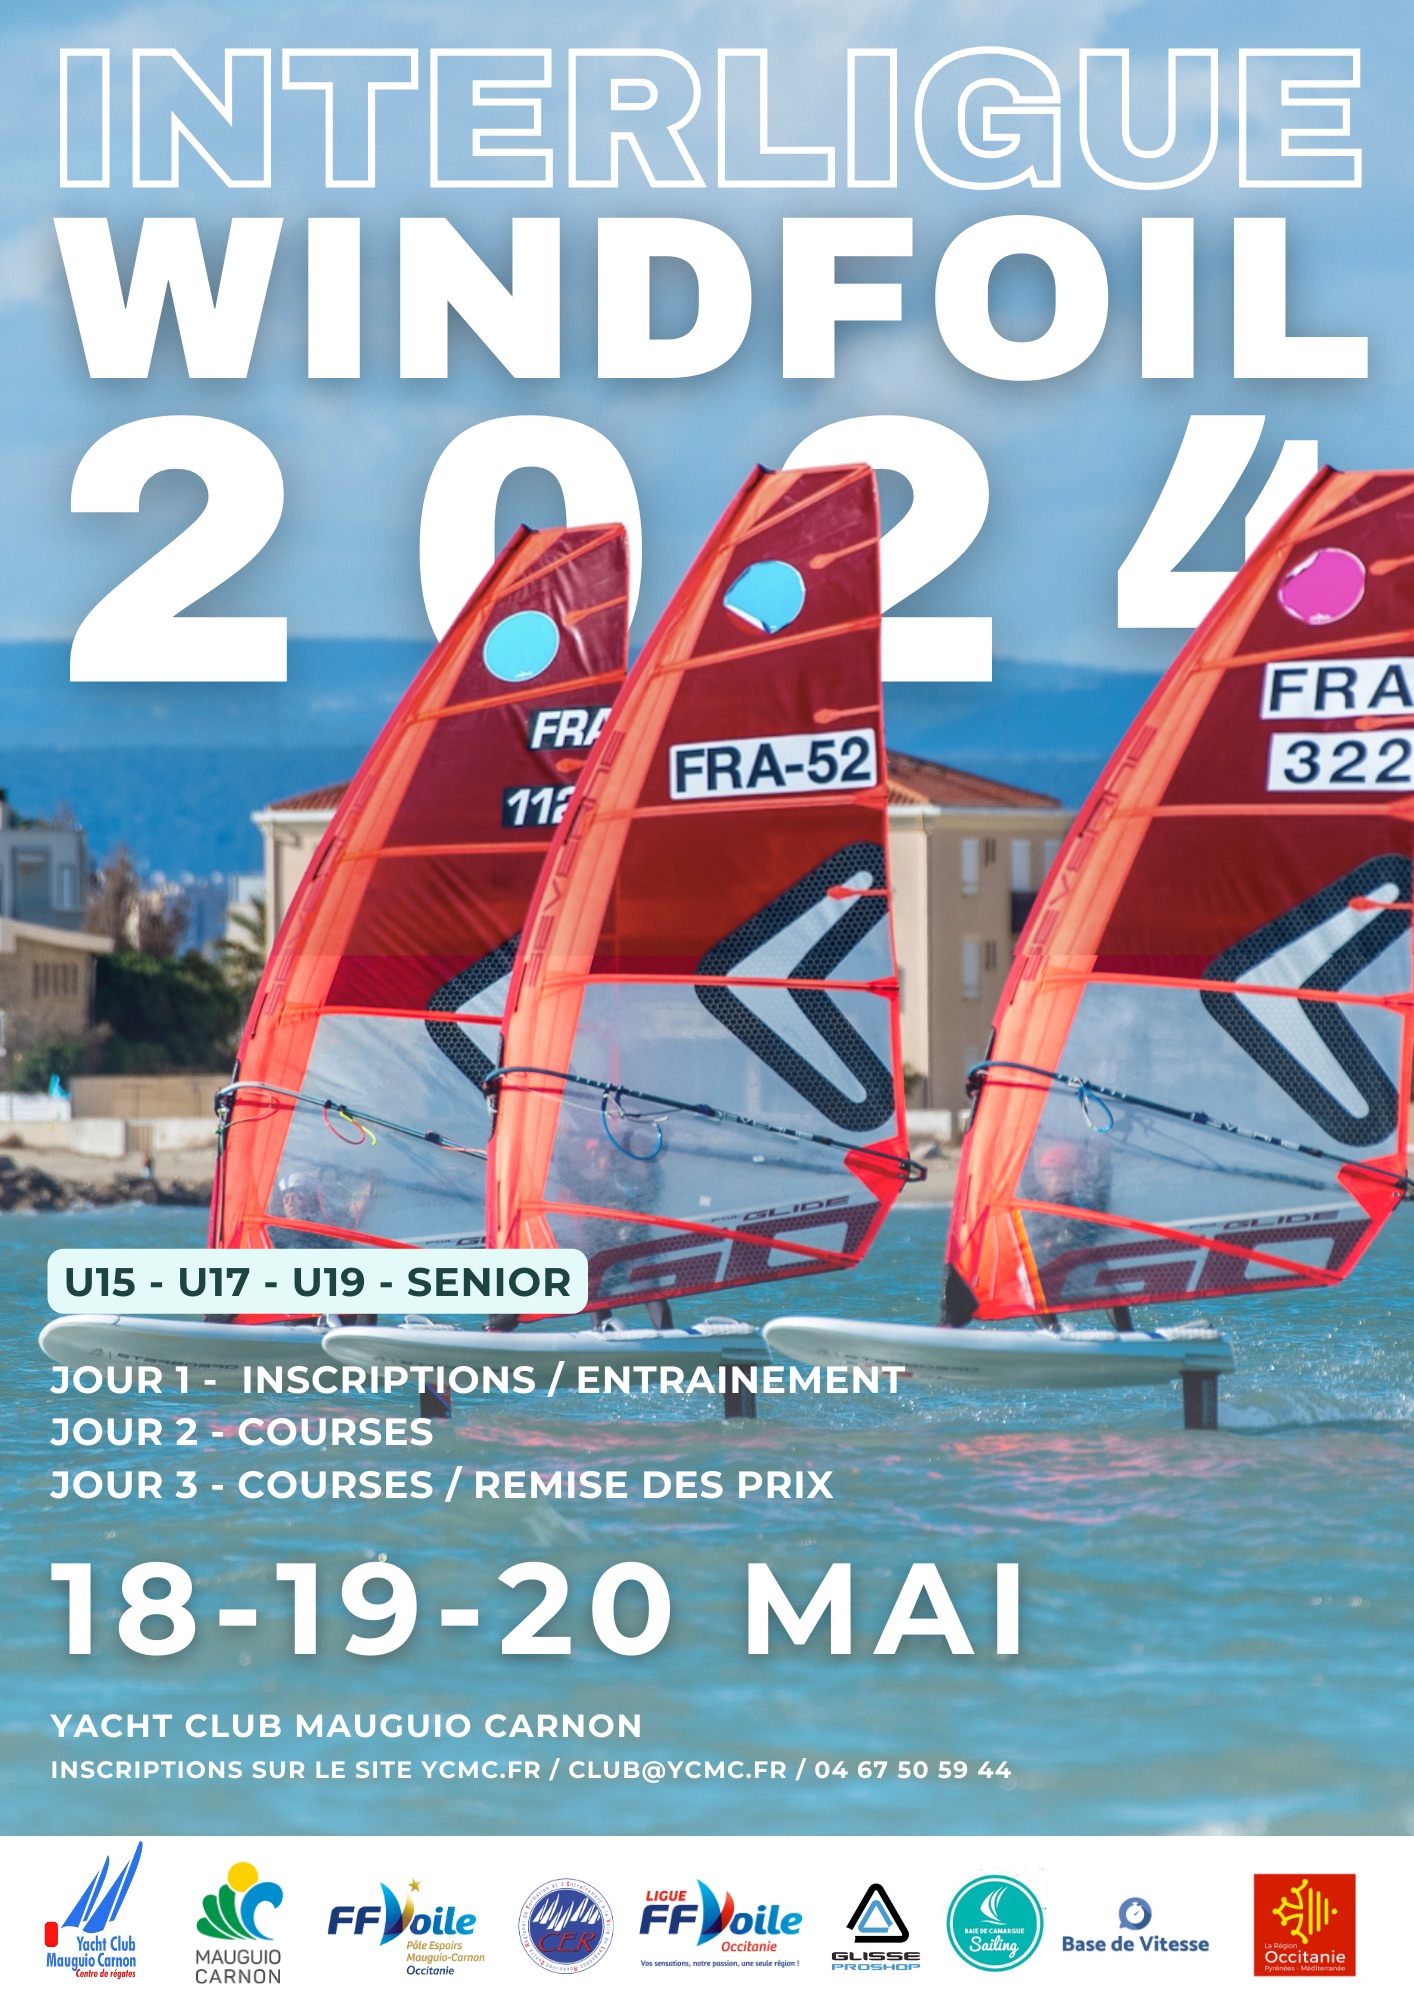 interligue windfoil 2